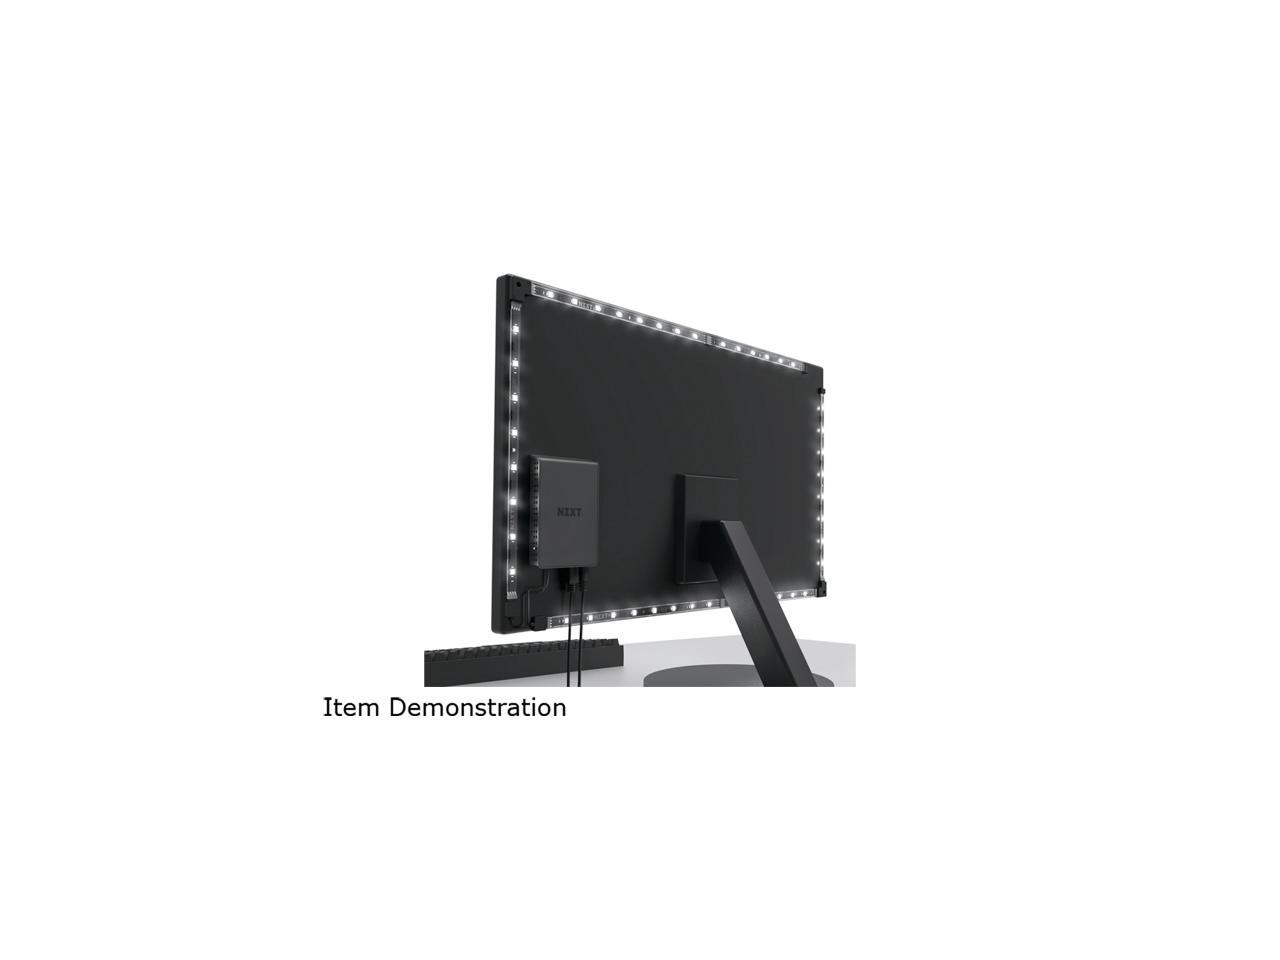 NZXT Ambient Lighting Kit (Ultrawide) Desktop Lighting System Powered by NZXT CAM, 26 to 32 inches(AC-HUEHU-B2)